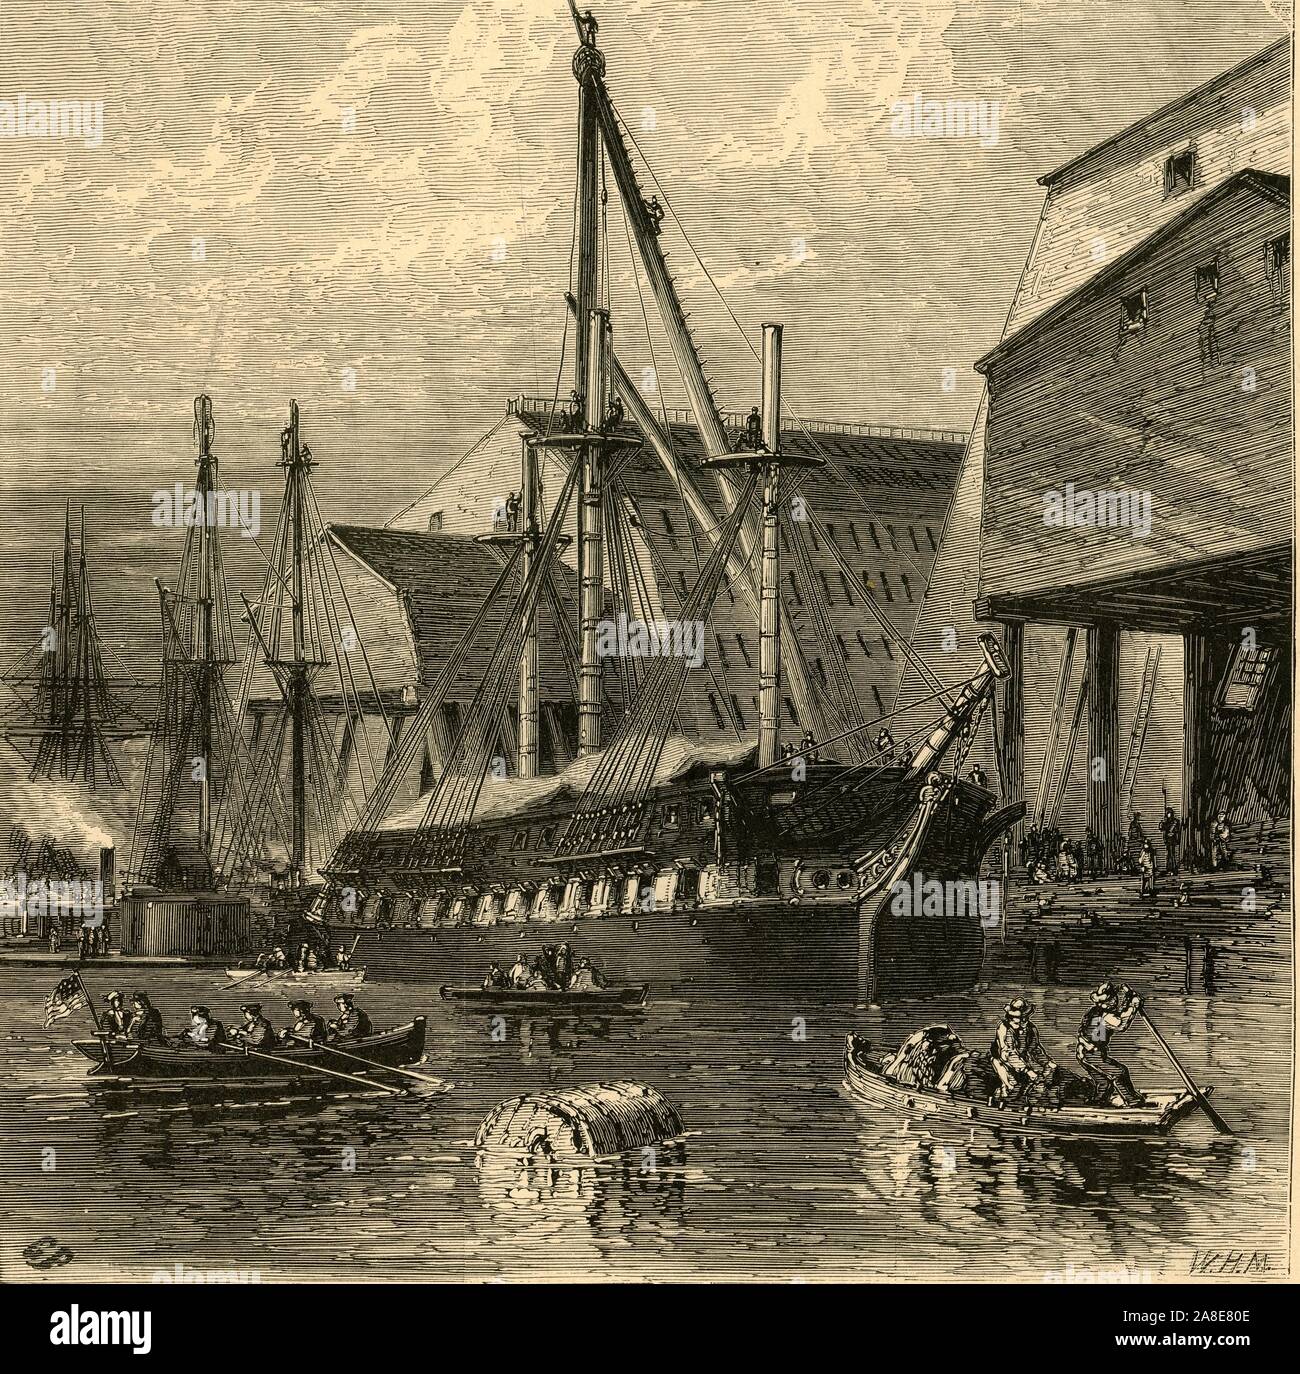 'Navy Yard', 1874. Ships on the Delaware River at Philadelphia, Pennsylvania, USA. The Philadelphia Naval Shipyard was the first shipyard to be built for the US Navy, and was in use from 1801 until its closure in 1995. 'To the south [the artist's] roving eye will first be caught by the old Navy- Yard, with its ark-like ship-houses, its tiers of masts and docks, and the green oases of its officers' quarters'. From &quot;Picturesque America; or, The Land We Live In, A Delineation by Pen and Pencil of the Mountains, Rivers, Lakes...with Illustrations on Steel and Wood by Eminent American Artists& Stock Photo